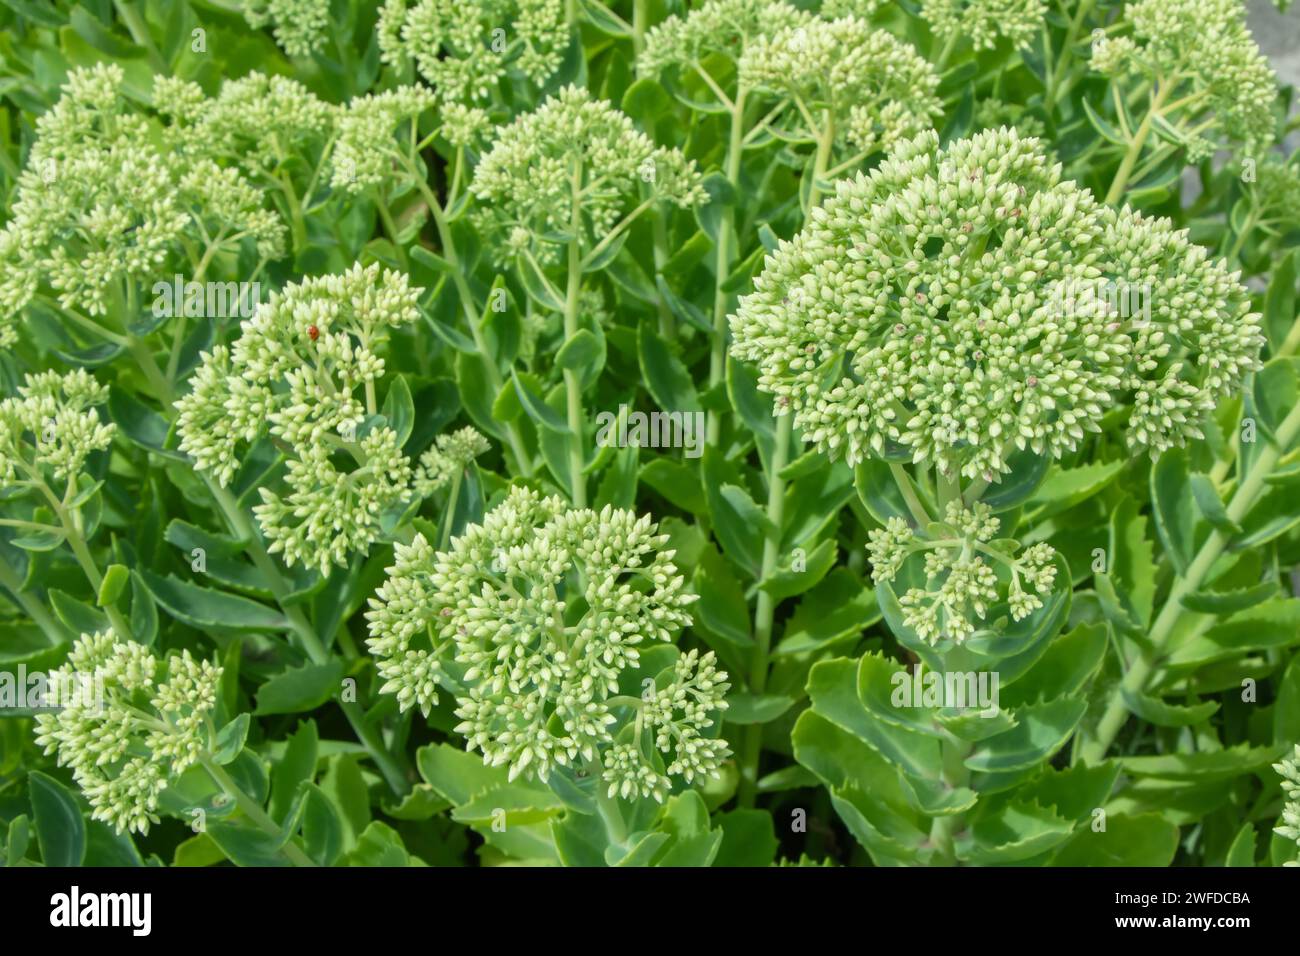 Plant Sedum Spectabile or Hylotelephium Spectabile is ready to bloom. Green round leaves background Stock Photo